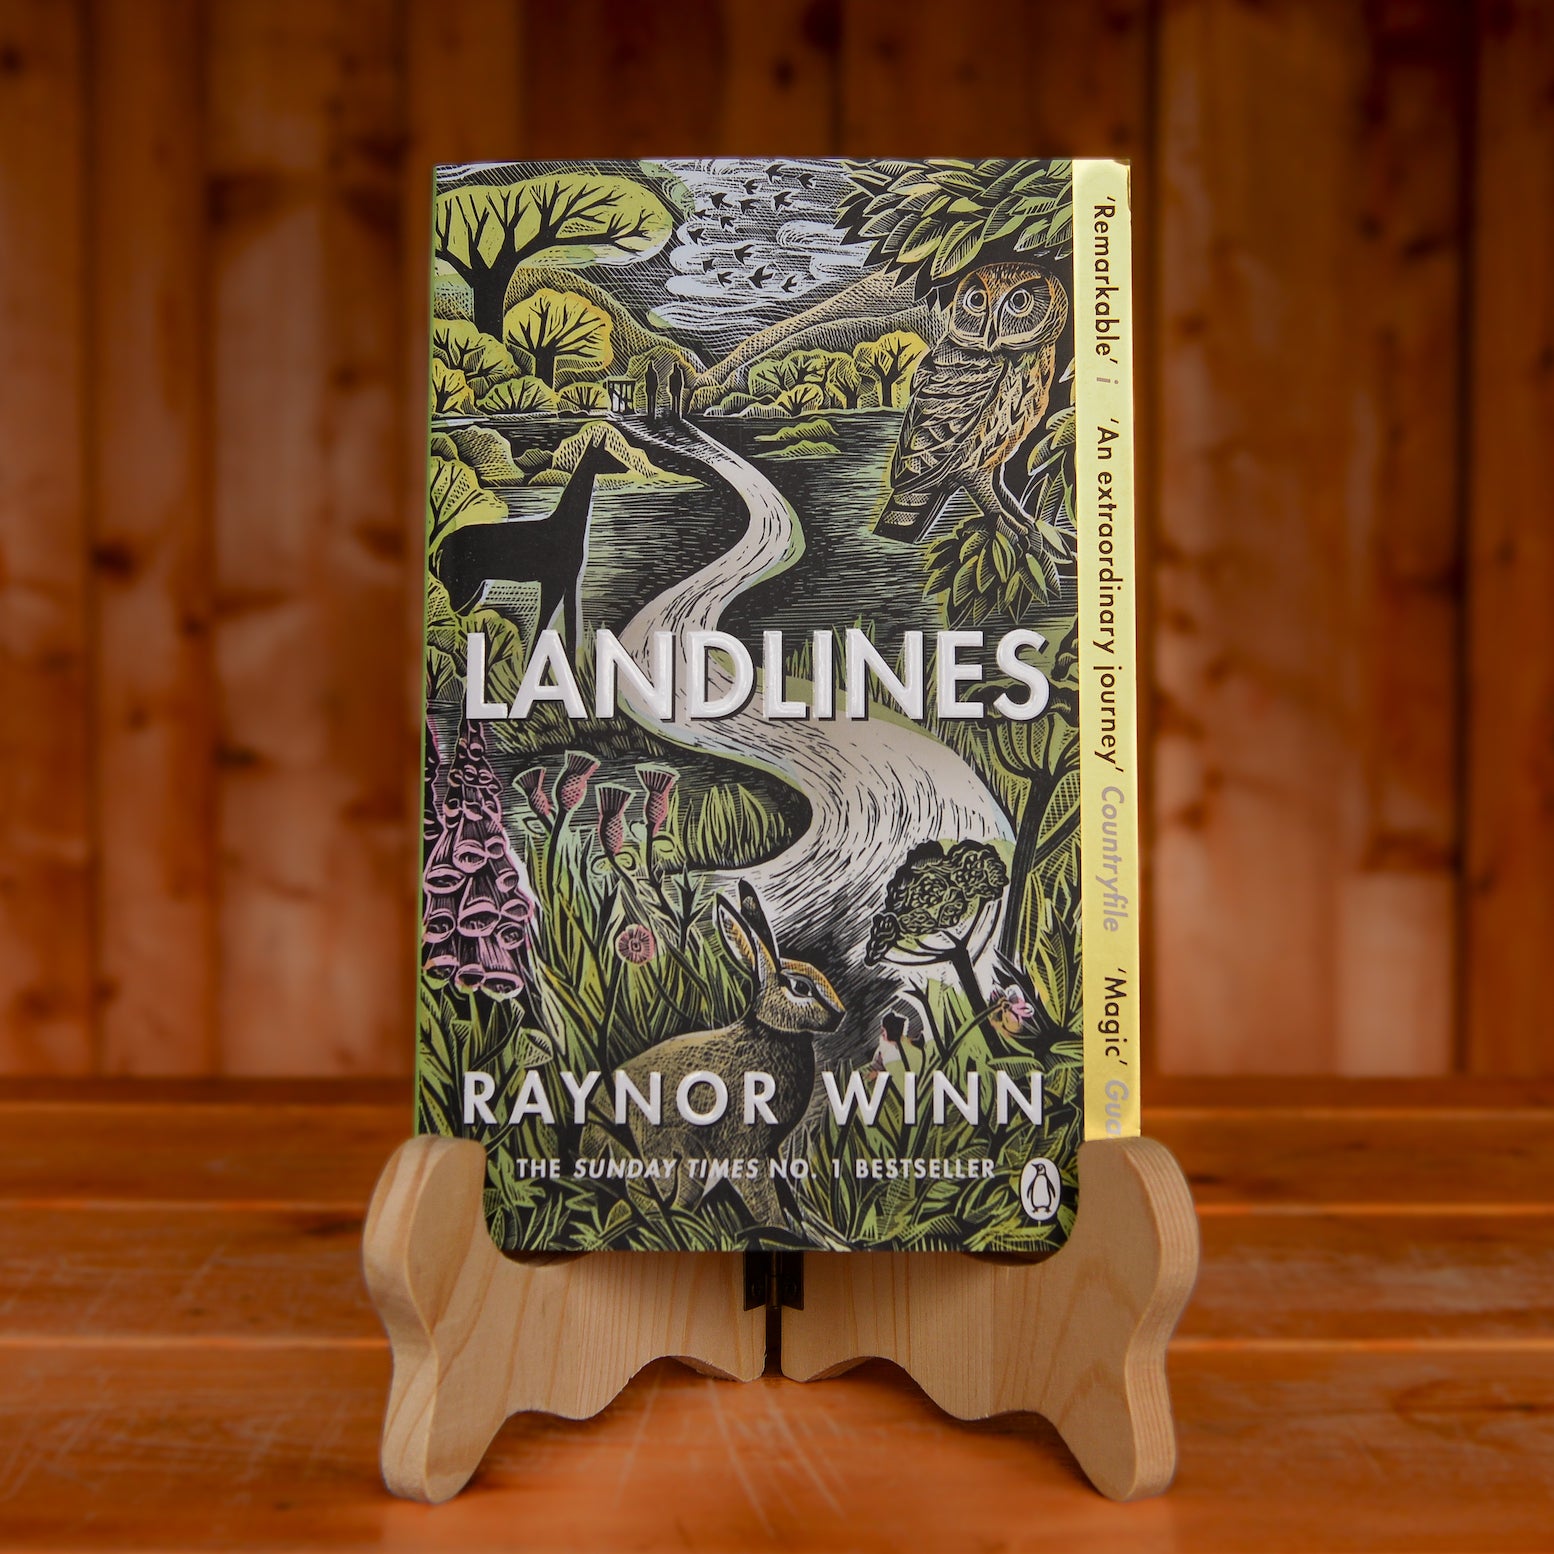 The book Landlines by Raynor Winn displayed on a book stand on a wooden table